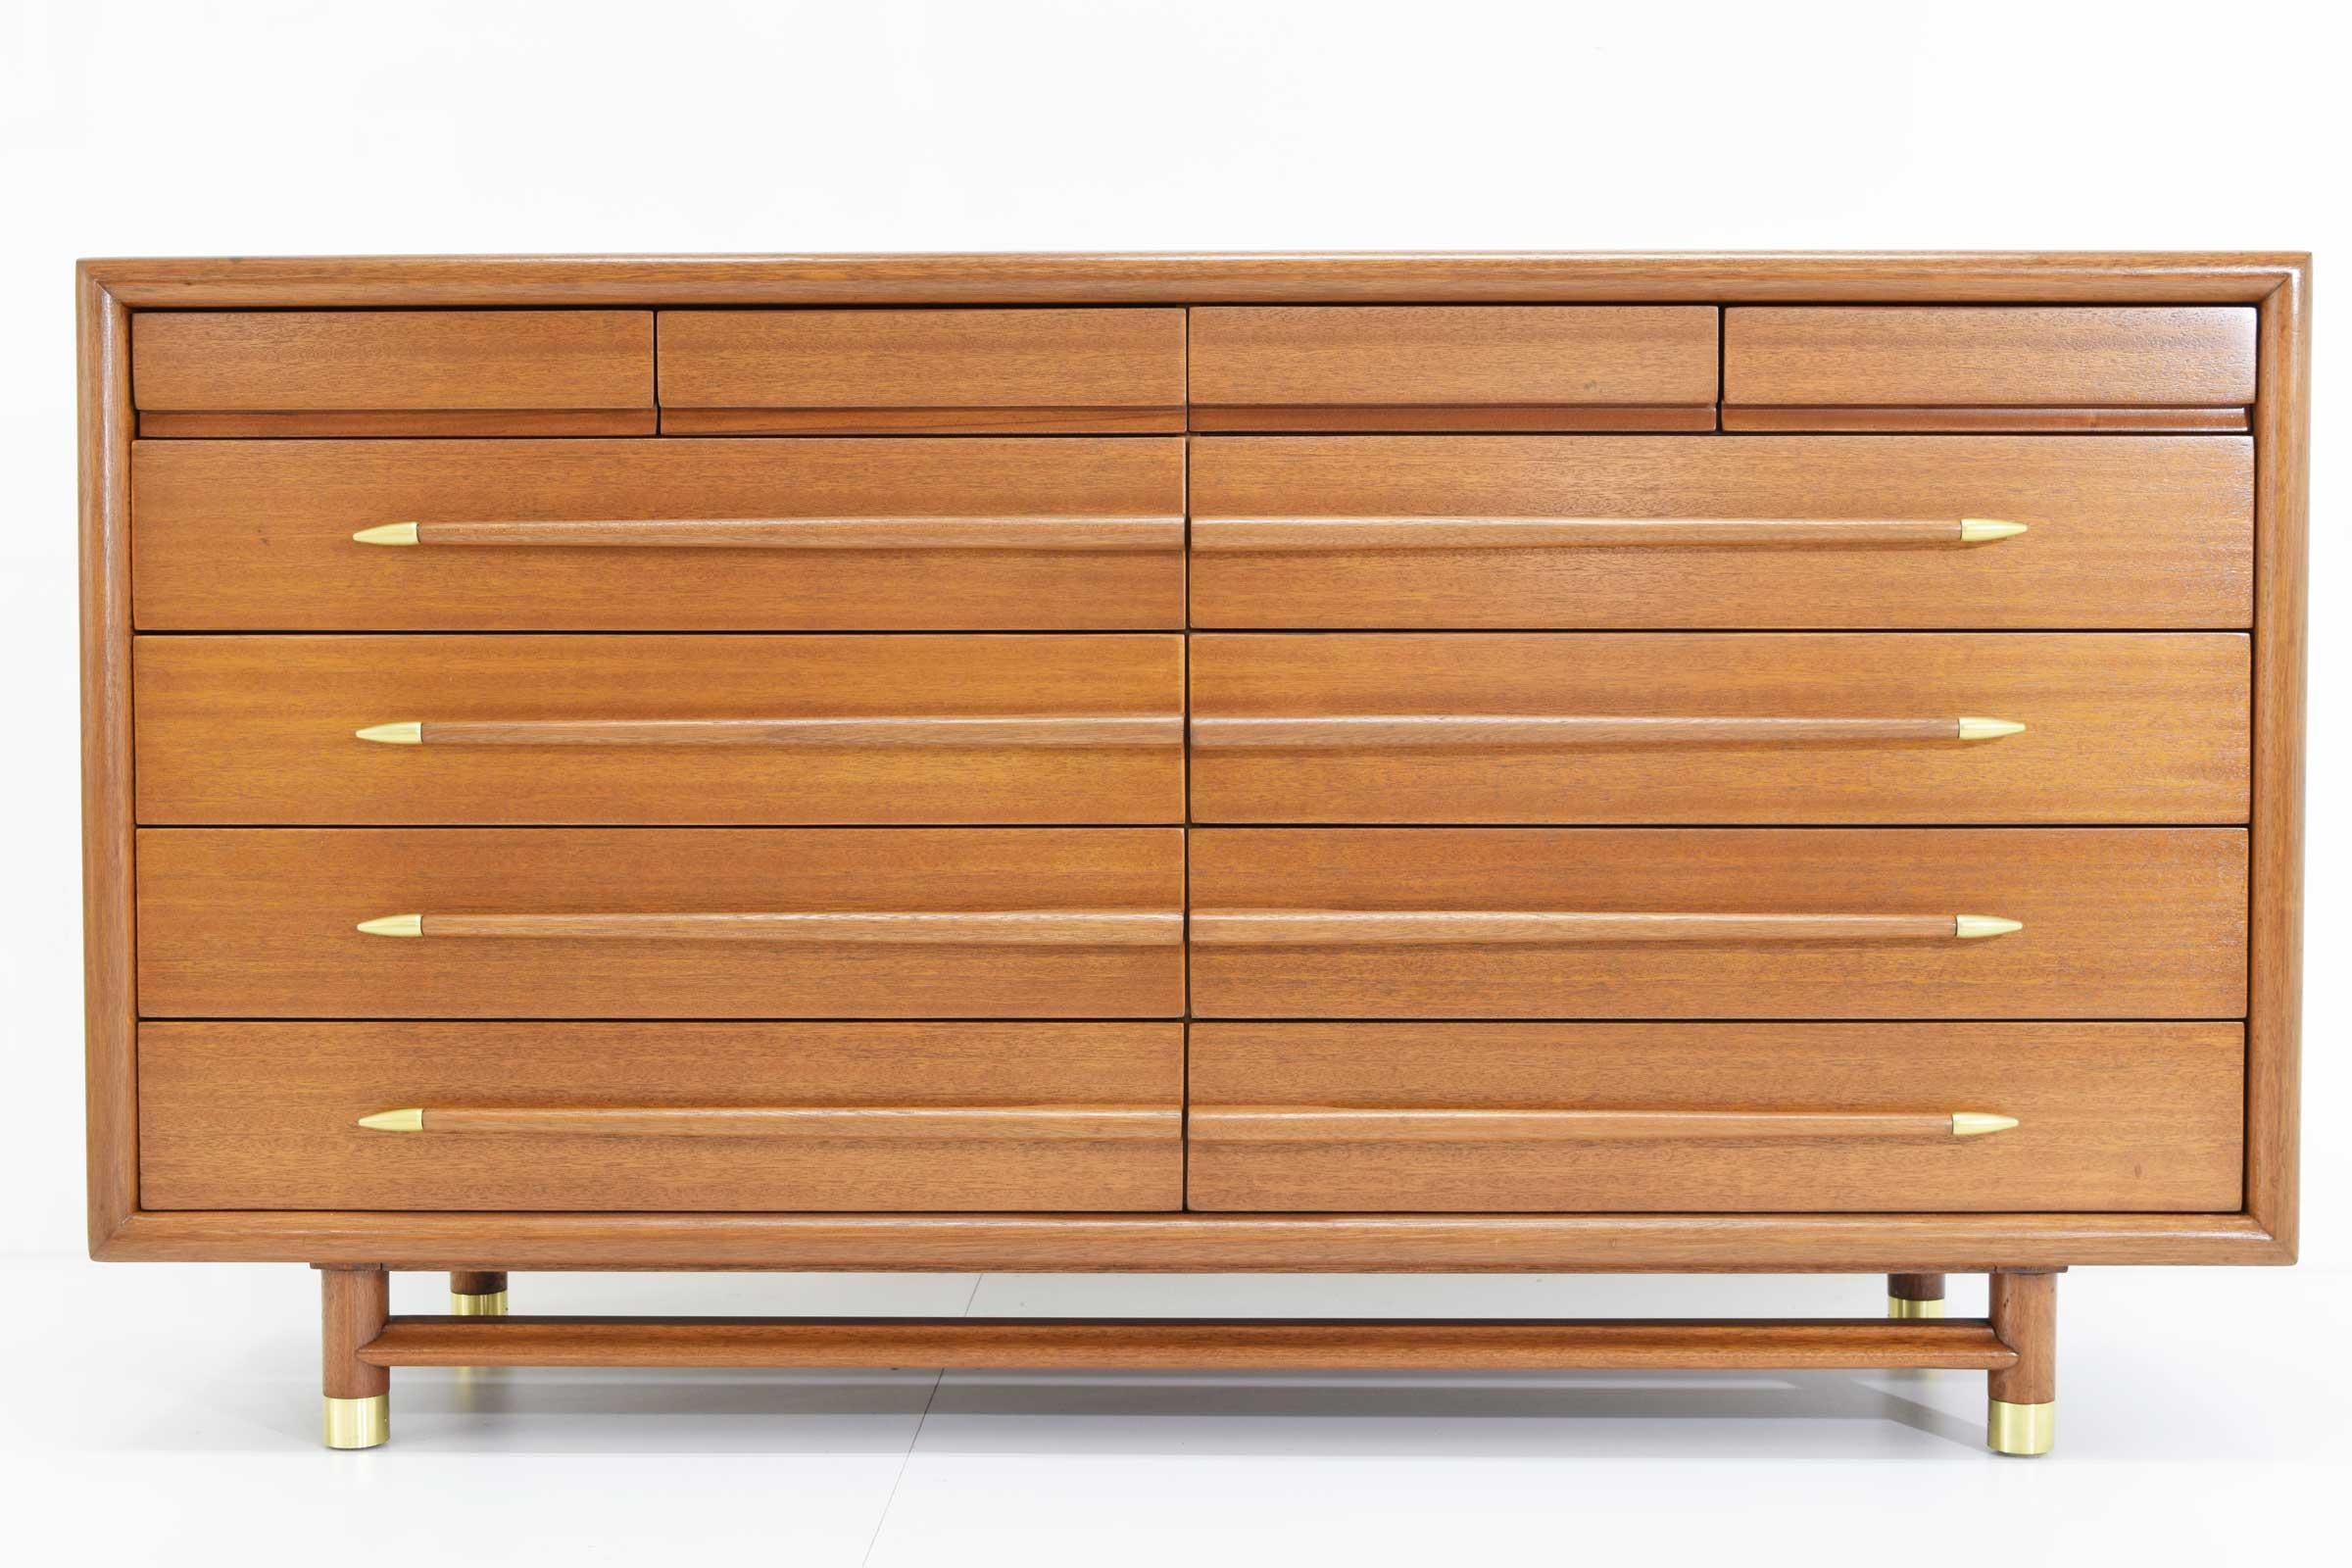 Beautifully restored chest of drawers by John Keal. Walnut 12-drawer dresser with sculptural pulls terminating in polished metal tips by John Keal for Brown-Saltman, 1950s. Back stamped with 9013 and Mr. & Mrs. A substantial piece with brass sabots